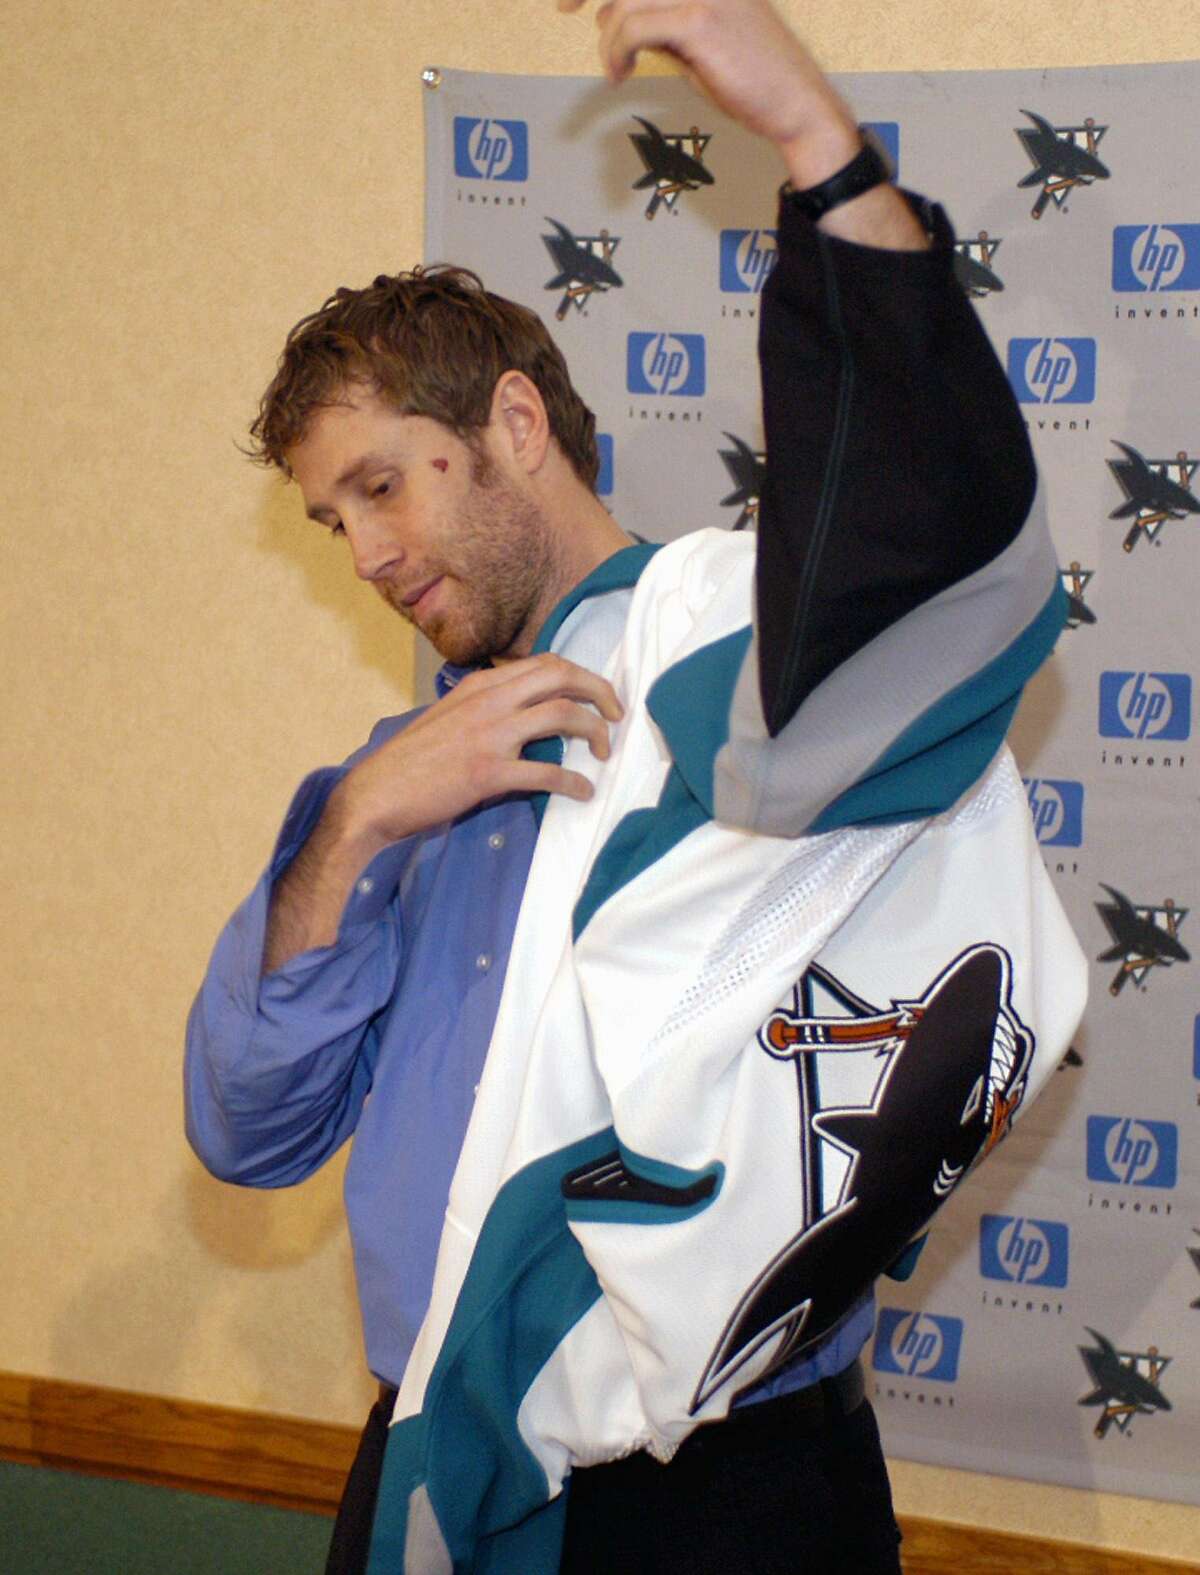 Joe Thornton tries on a San Jose Sharks jersey during a news conference in Buffalo, N.Y. on Thursday, Dec 1, 2005. The Boston Bruins traded Thornton to the Sam Jose Sharks for forwards Marco Sturm and Wayne Primeau and defenseman Brad Stuart.(AP Photo/Don Heupel) Ran on: 12-02-2005 Ran on: 12-02-2005